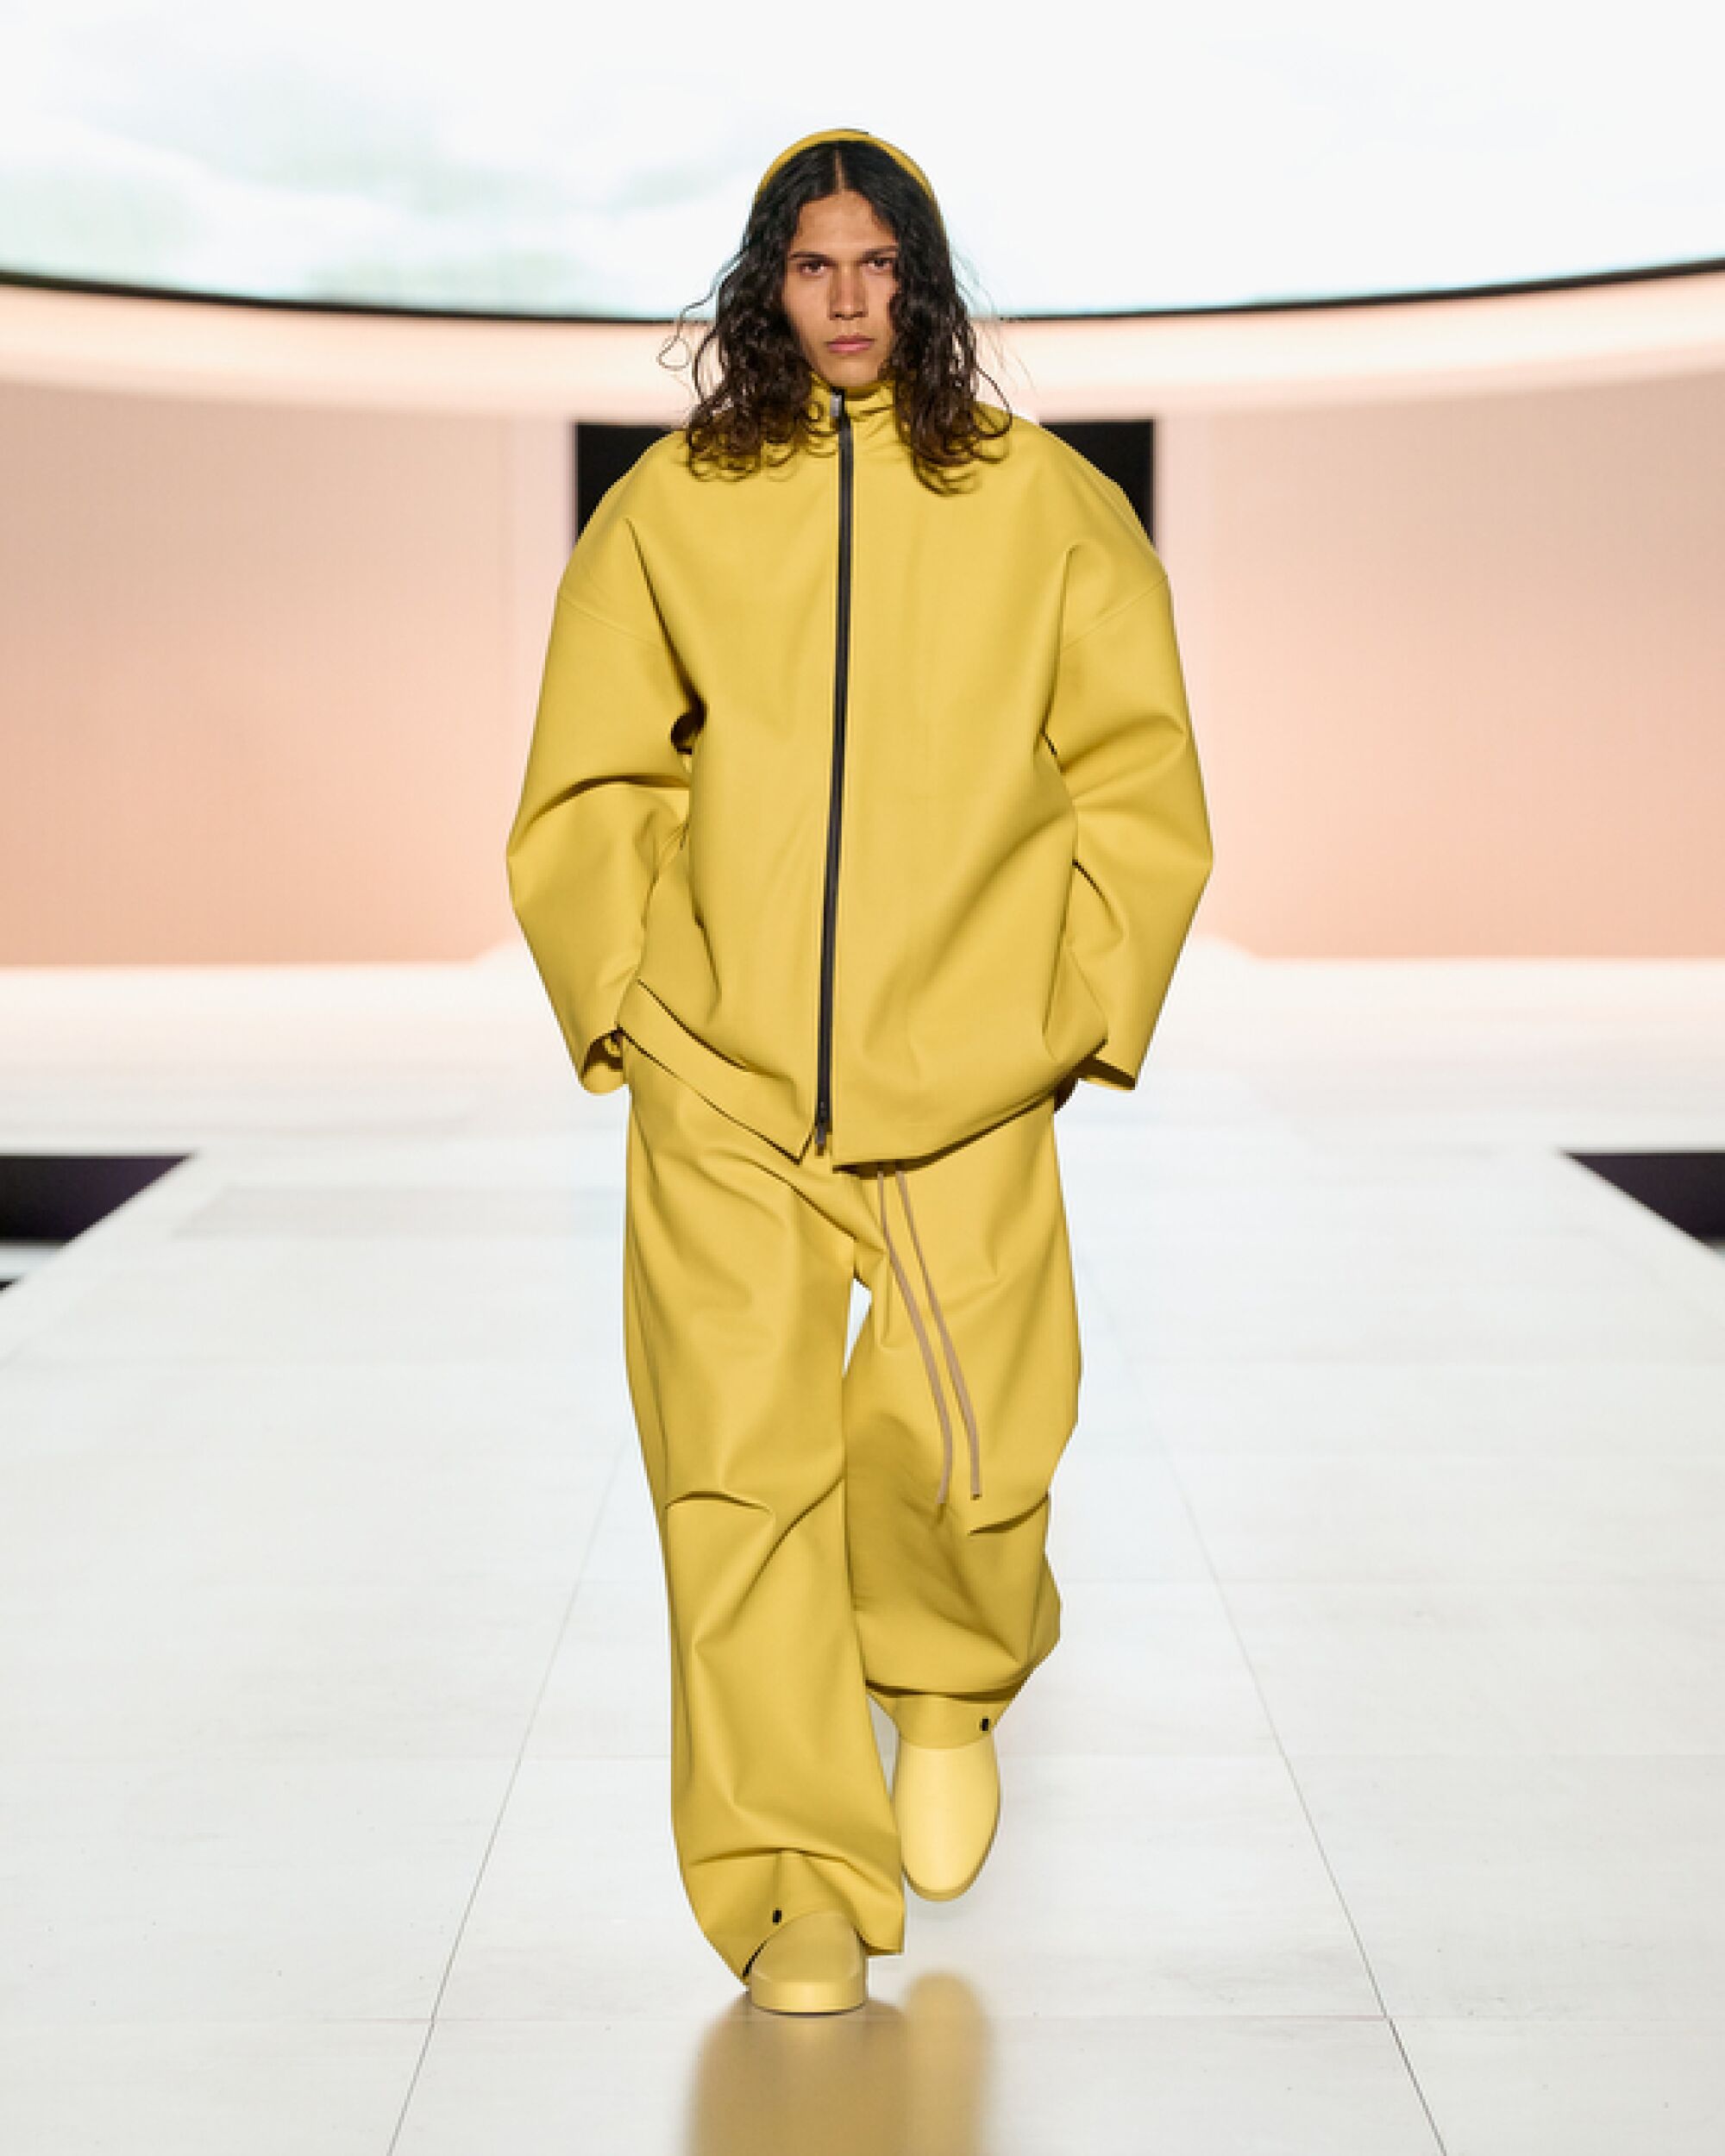 Model wears yellow Fear of God outfit on runway.